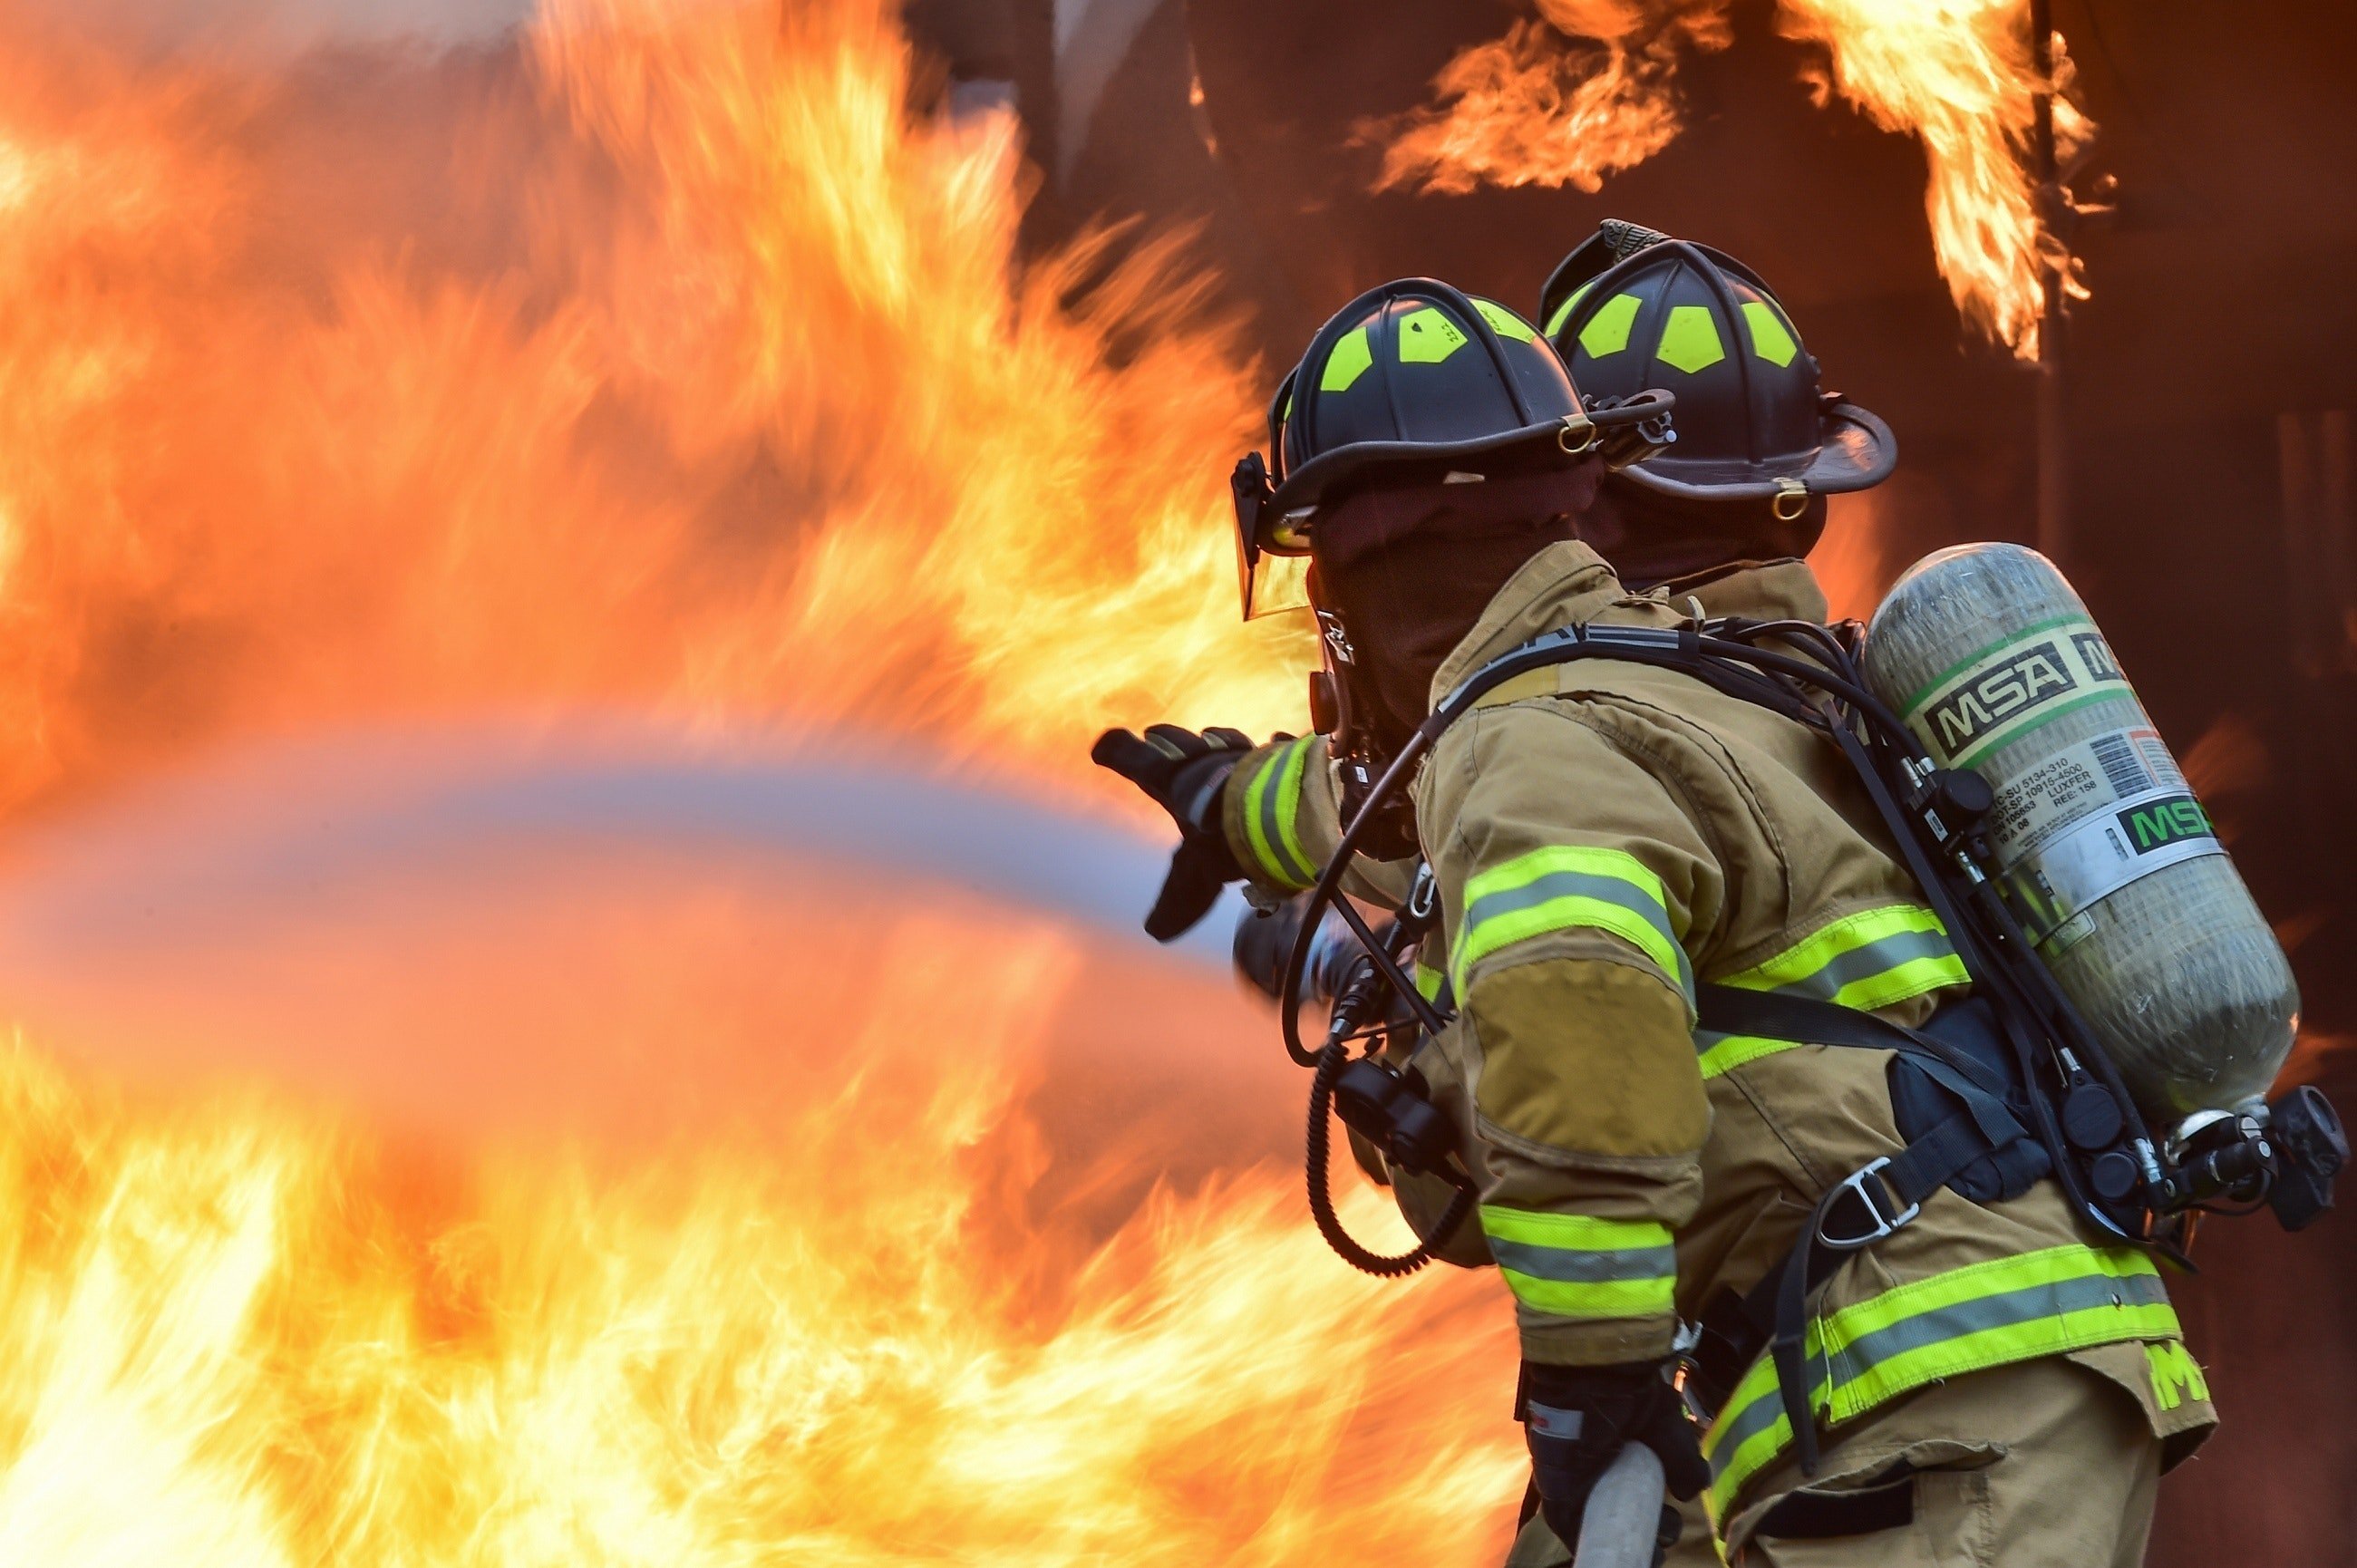 Firefighter fighting a fire. | Photo: Pexels